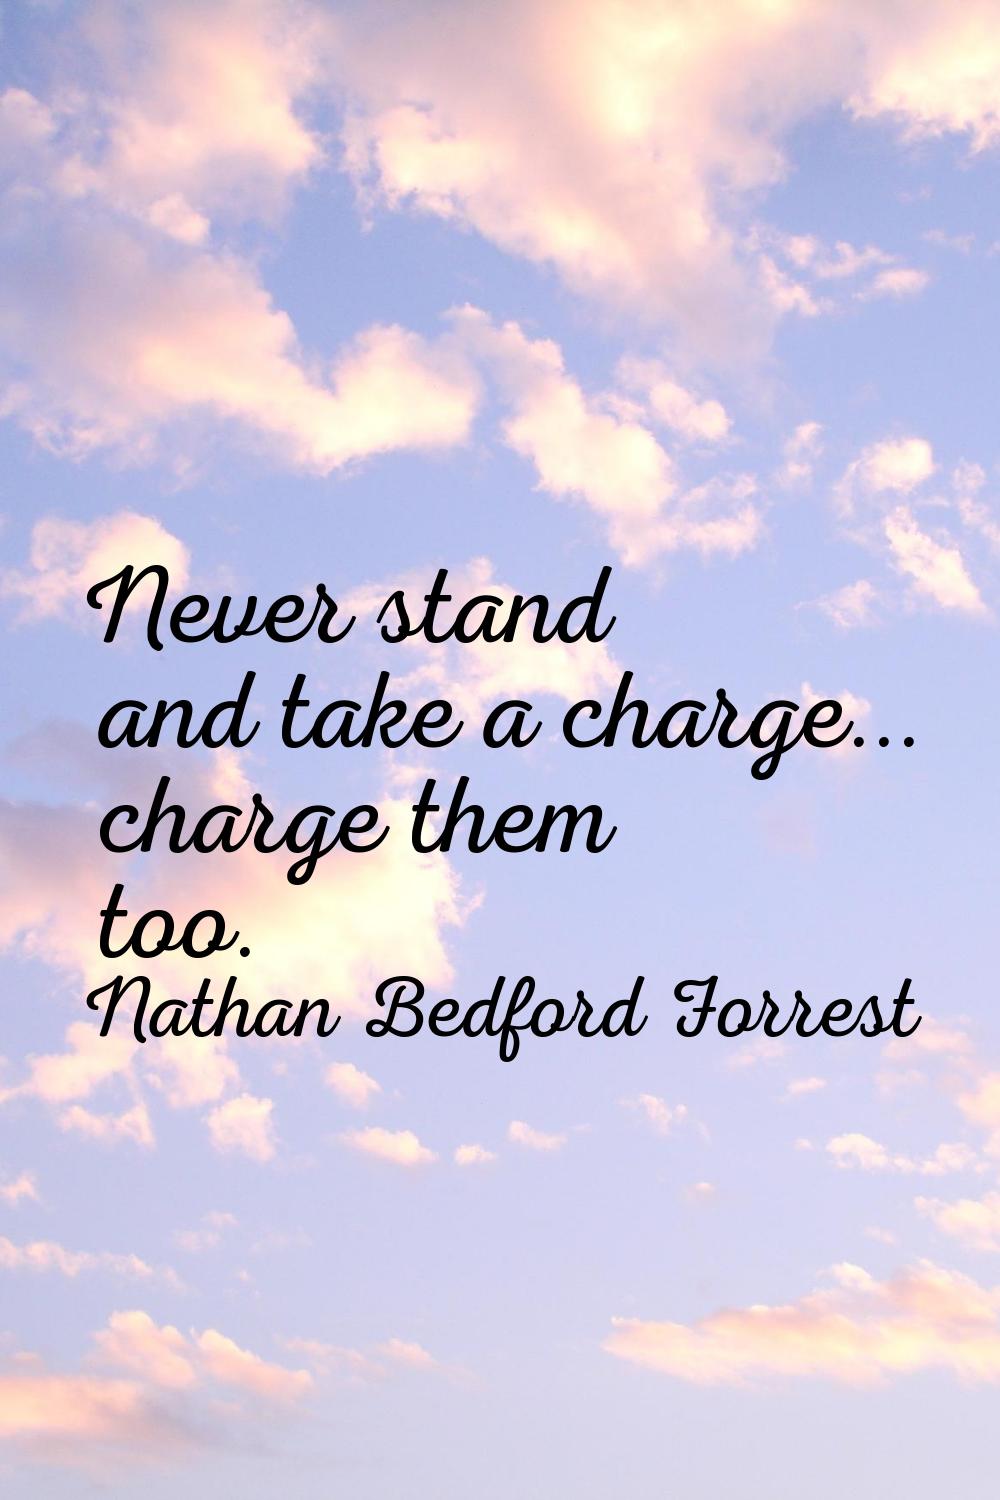 Never stand and take a charge... charge them too.